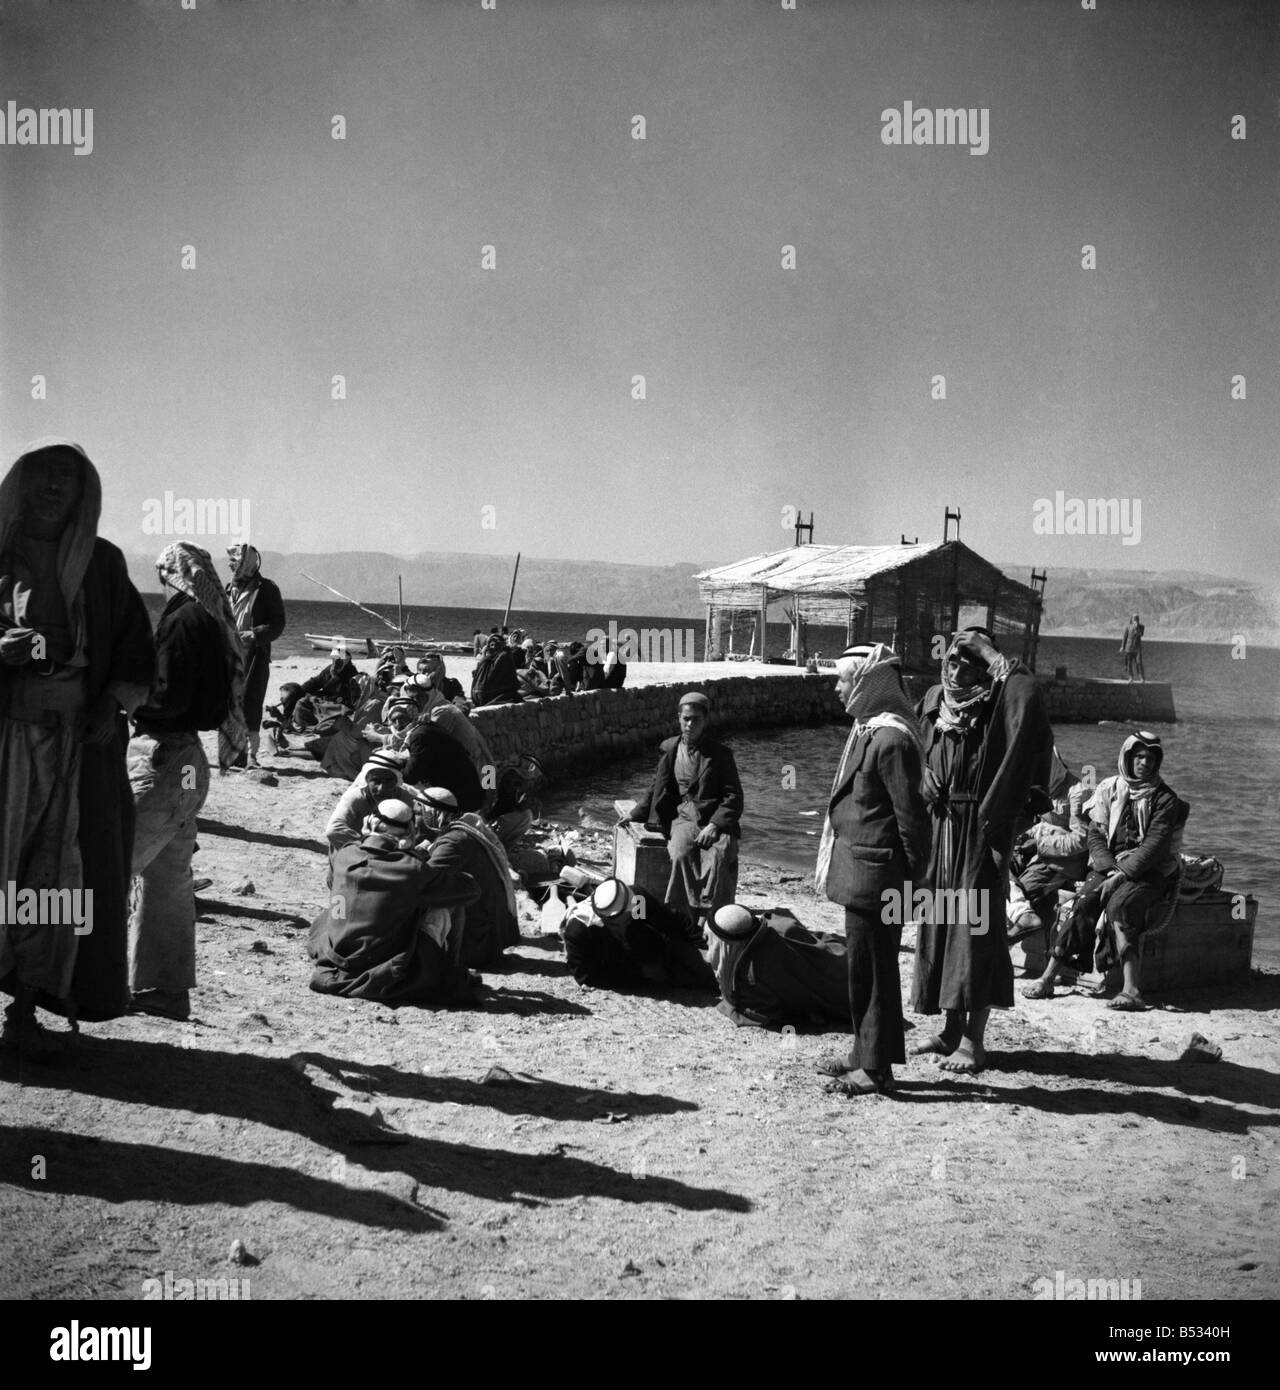 Men waiting by the quay for the ferry to arrive in Aqaba, trans Jordan . March 1952 C1288-003 Stock Photo